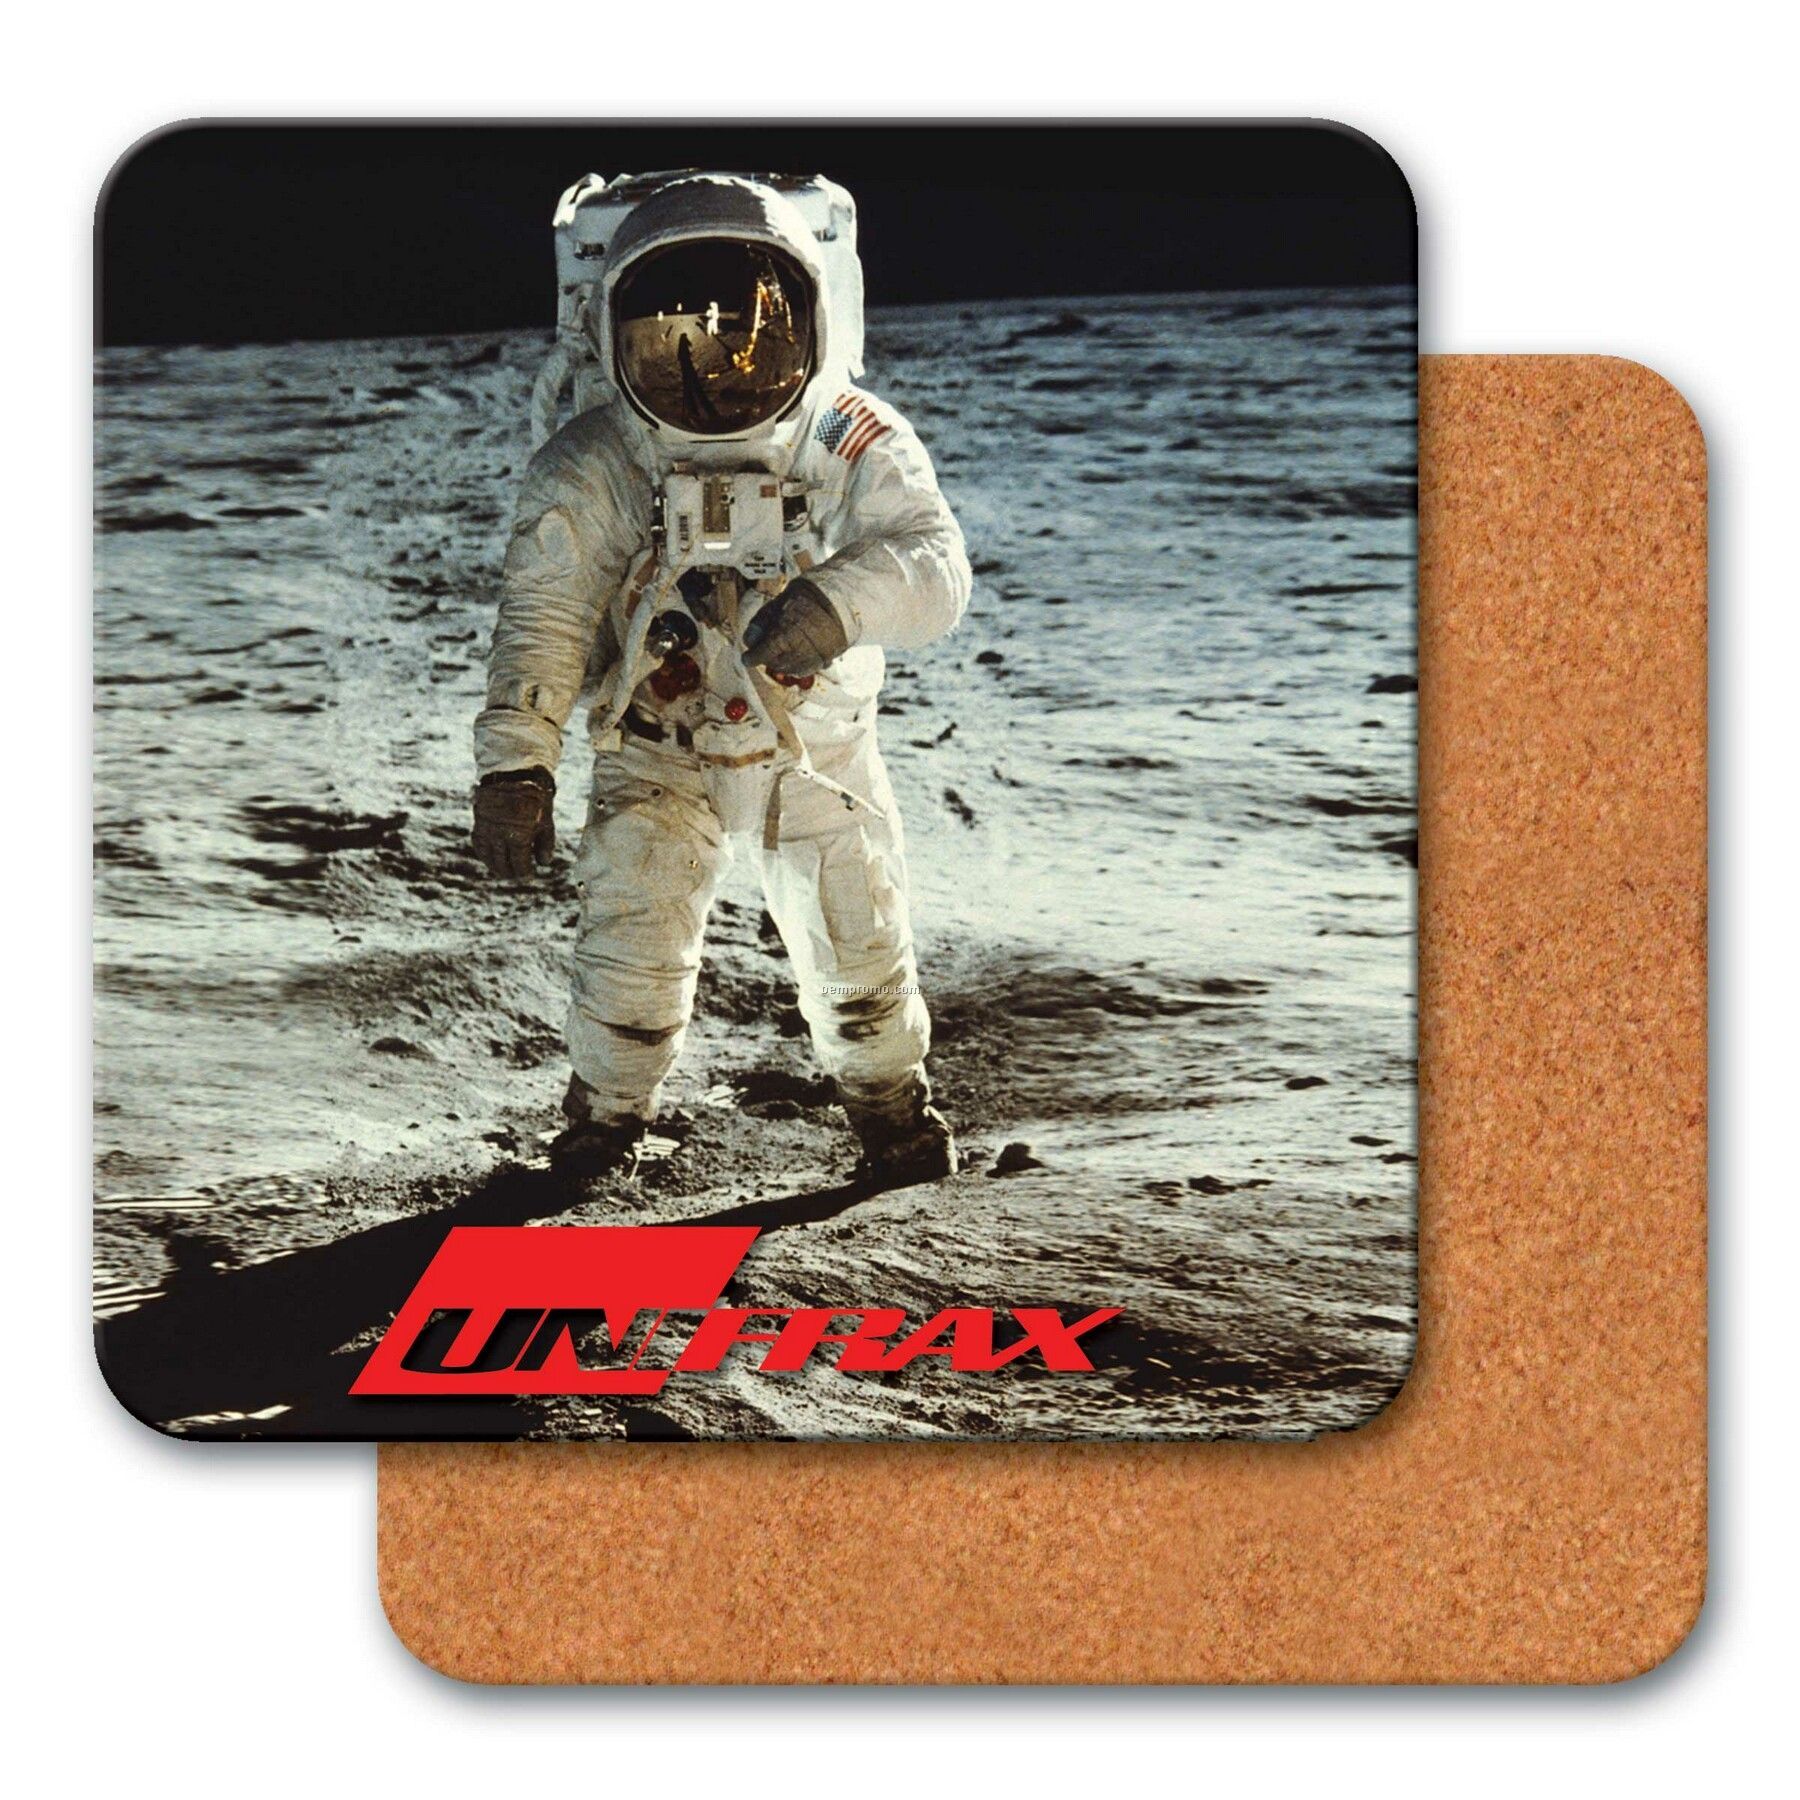 4" Square Coaster W/3d Lenticular Images Of An Astronaut (Custom)